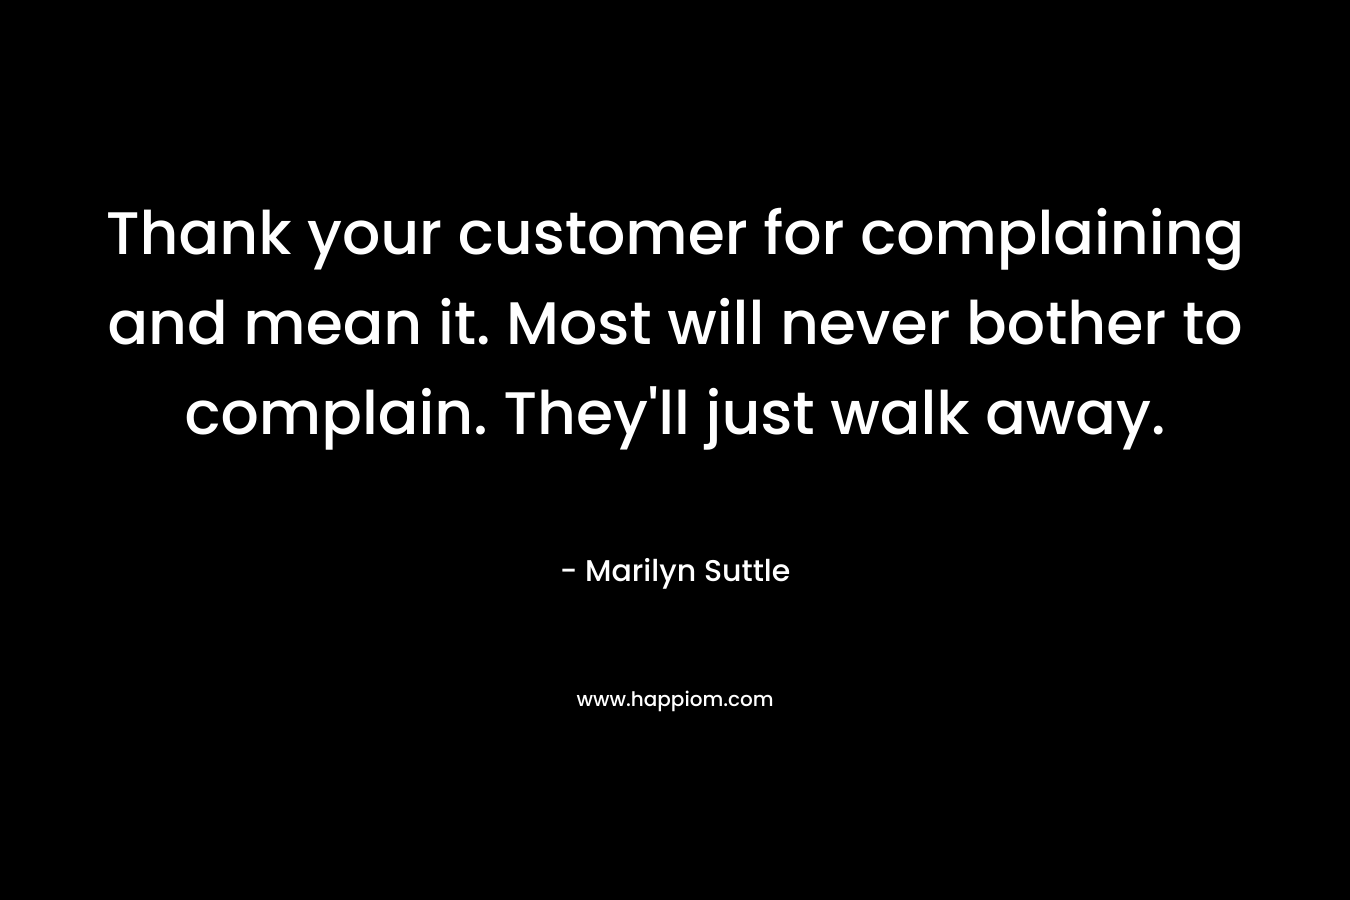 Thank your customer for complaining and mean it. Most will never bother to complain. They’ll just walk away. – Marilyn Suttle